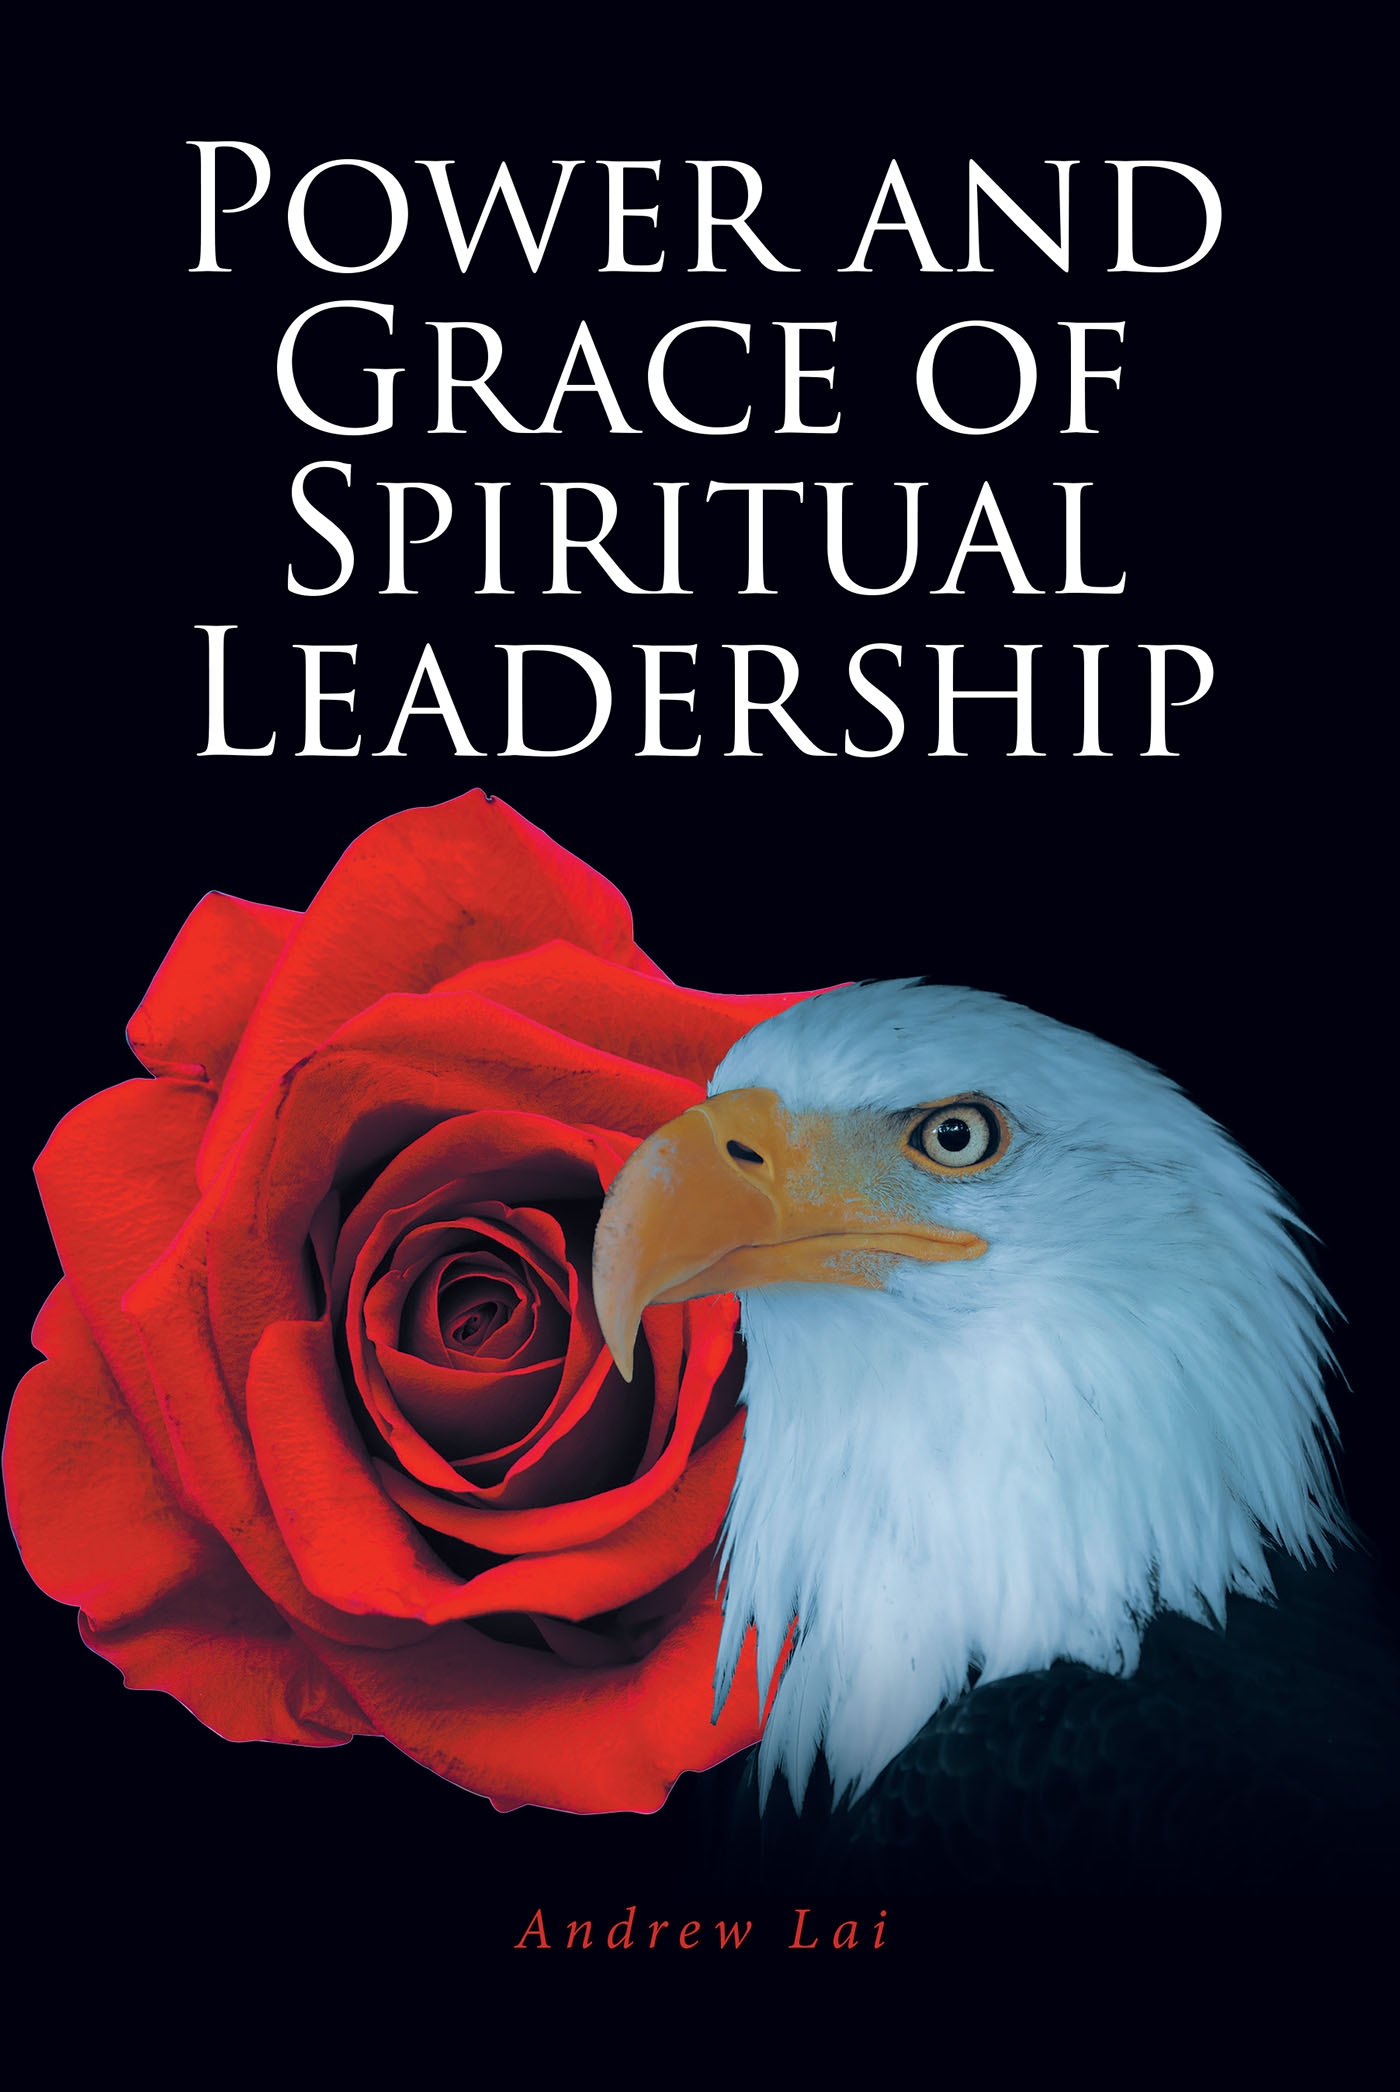 Andrew Lai’s Newly Released "Power and Grace of Spiritual Leadership" is an Inspiring Guide for Visionary Leaders